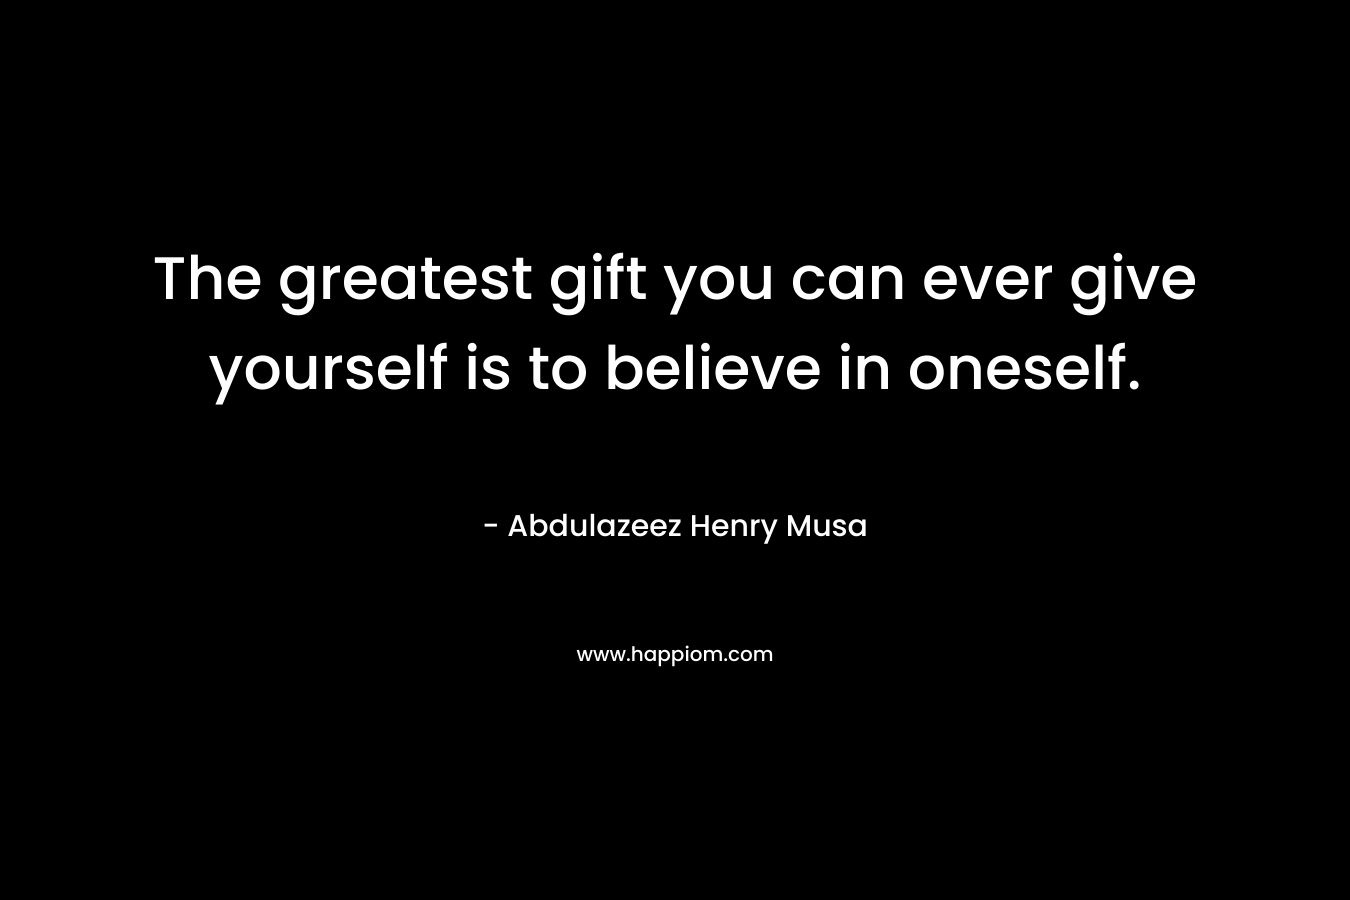 The greatest gift you can ever give yourself is to believe in oneself.